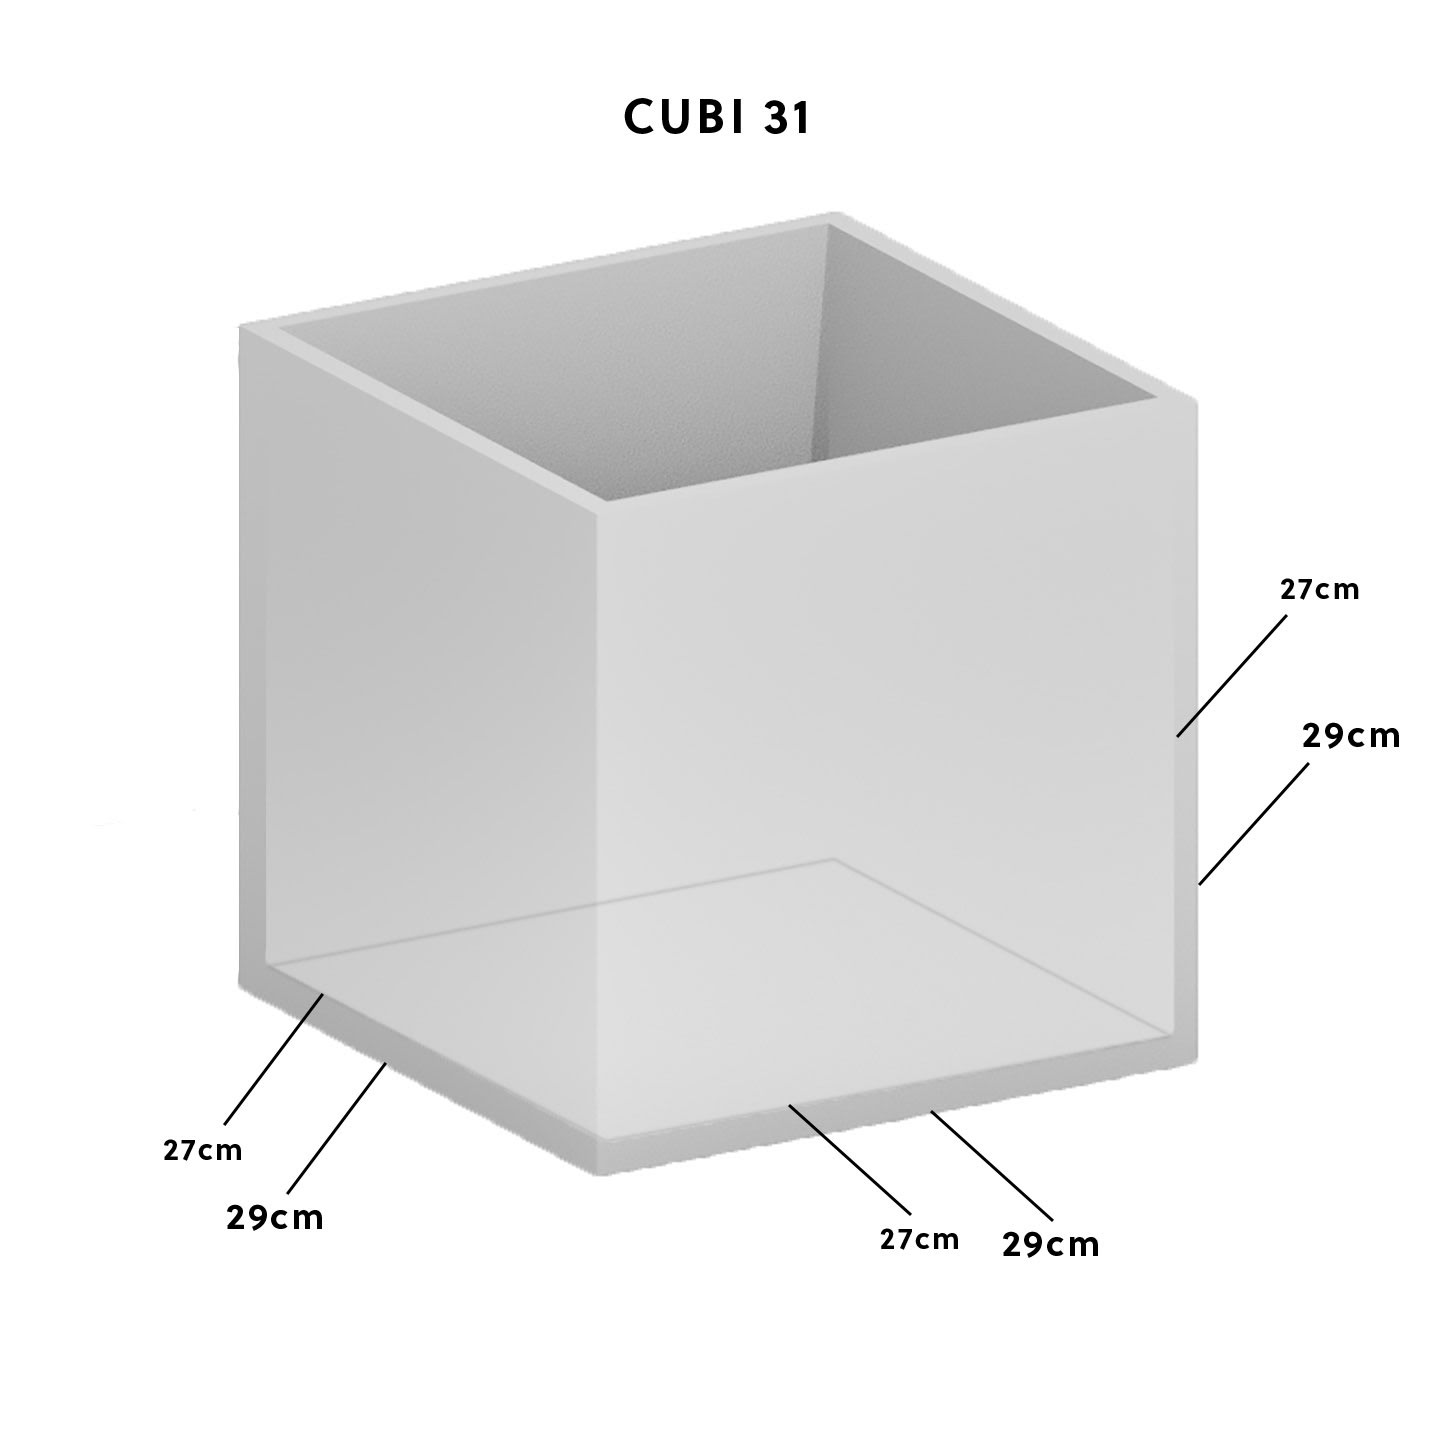 Cachepot CUBI 31 Anthracite from CLIMAQUA